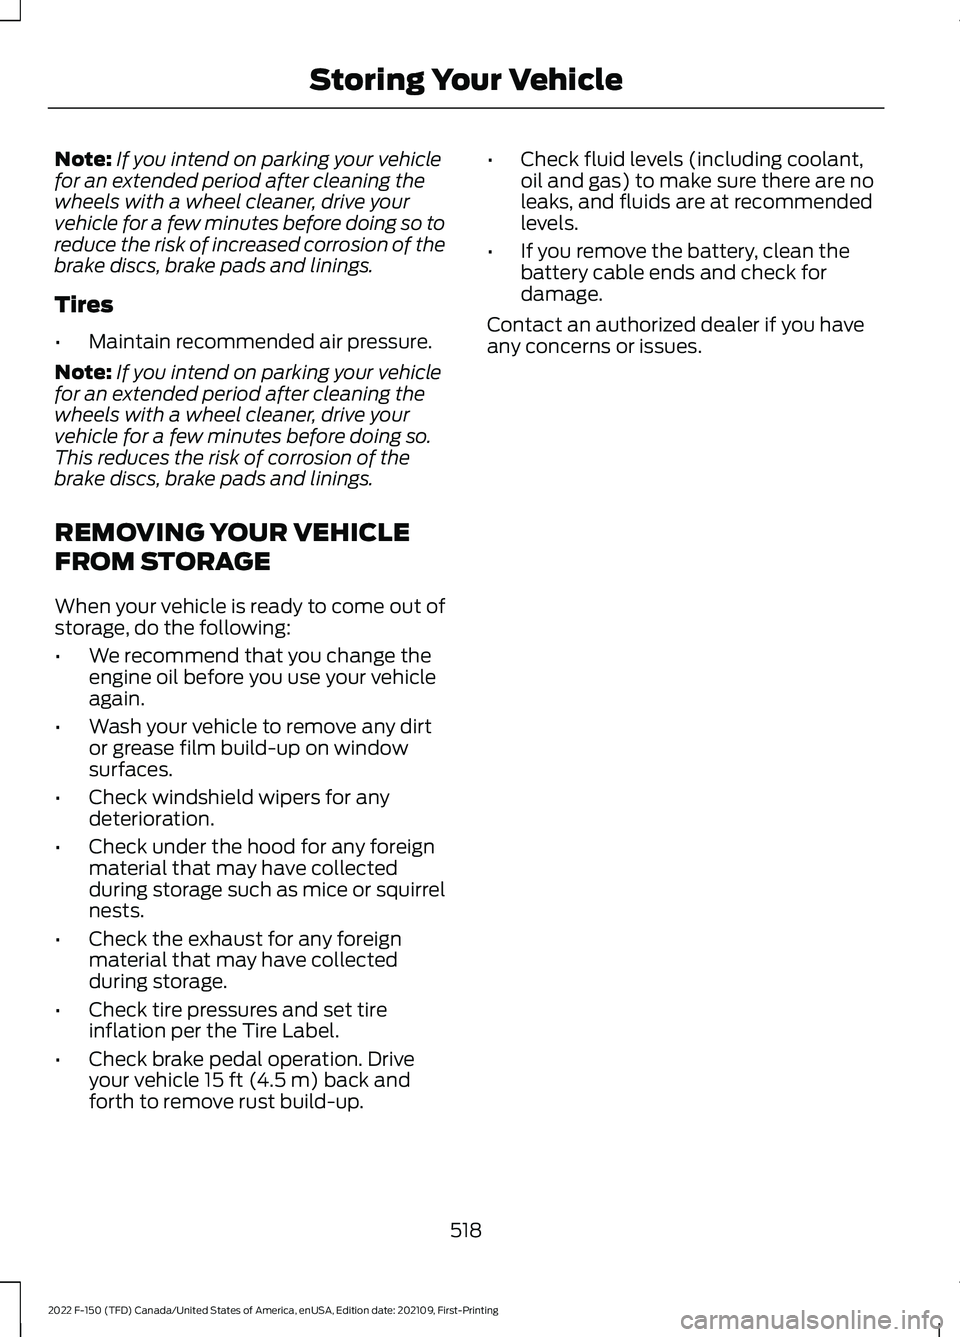 FORD F-150 2022  Owners Manual Note:
If you intend on parking your vehicle
for an extended period after cleaning the
wheels with a wheel cleaner, drive your
vehicle for a few minutes before doing so to
reduce the risk of increased 